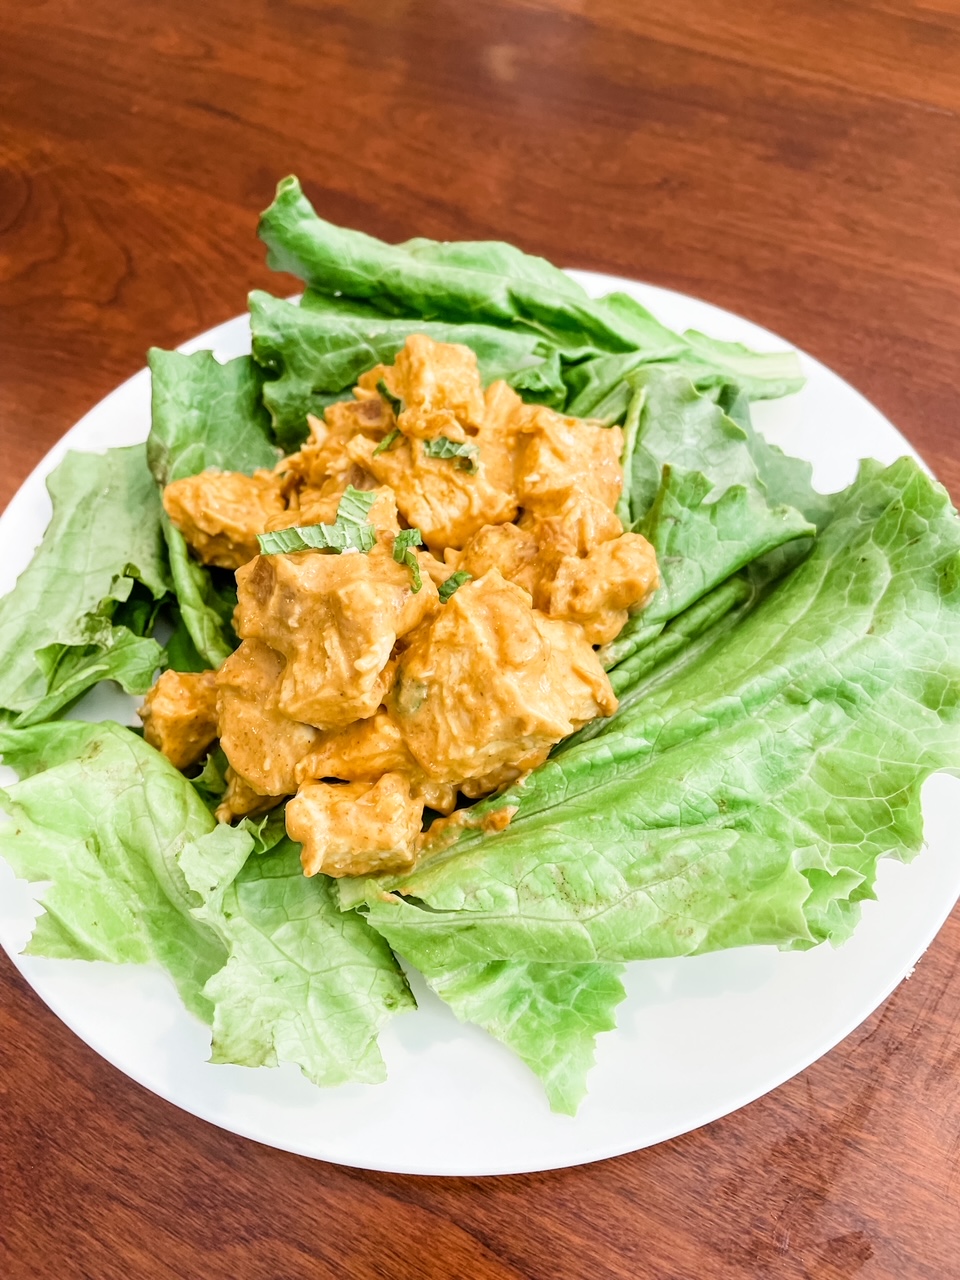 The Healthier Coronation Chicken served on a bed of lettuce